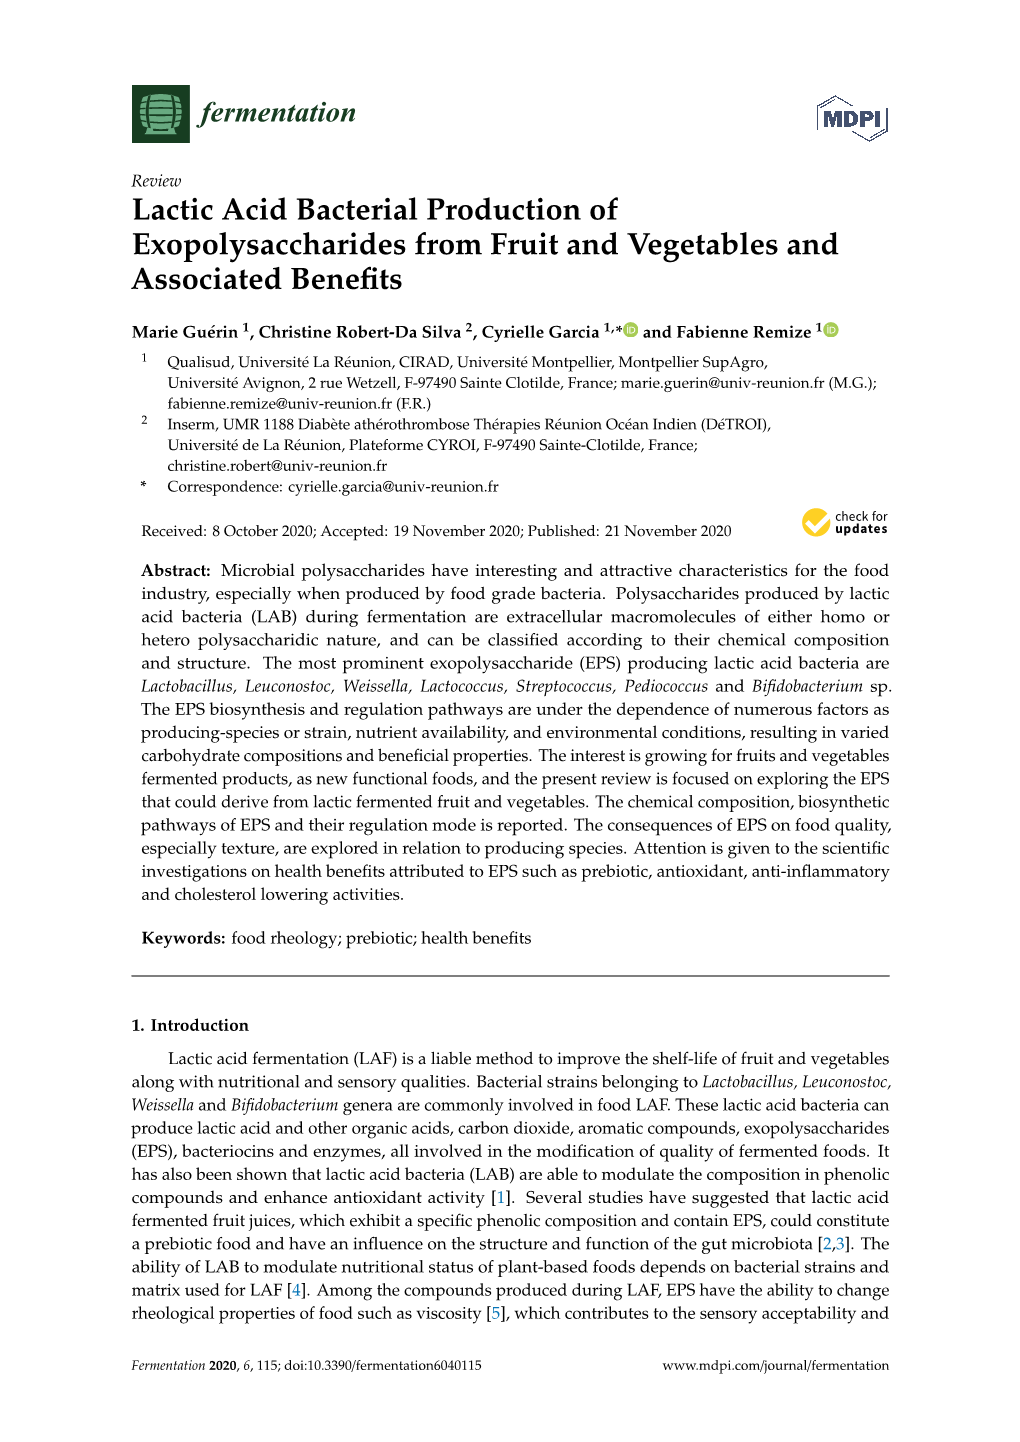 Lactic Acid Bacterial Production of Exopolysaccharides from Fruit and Vegetables and Associated Beneﬁts